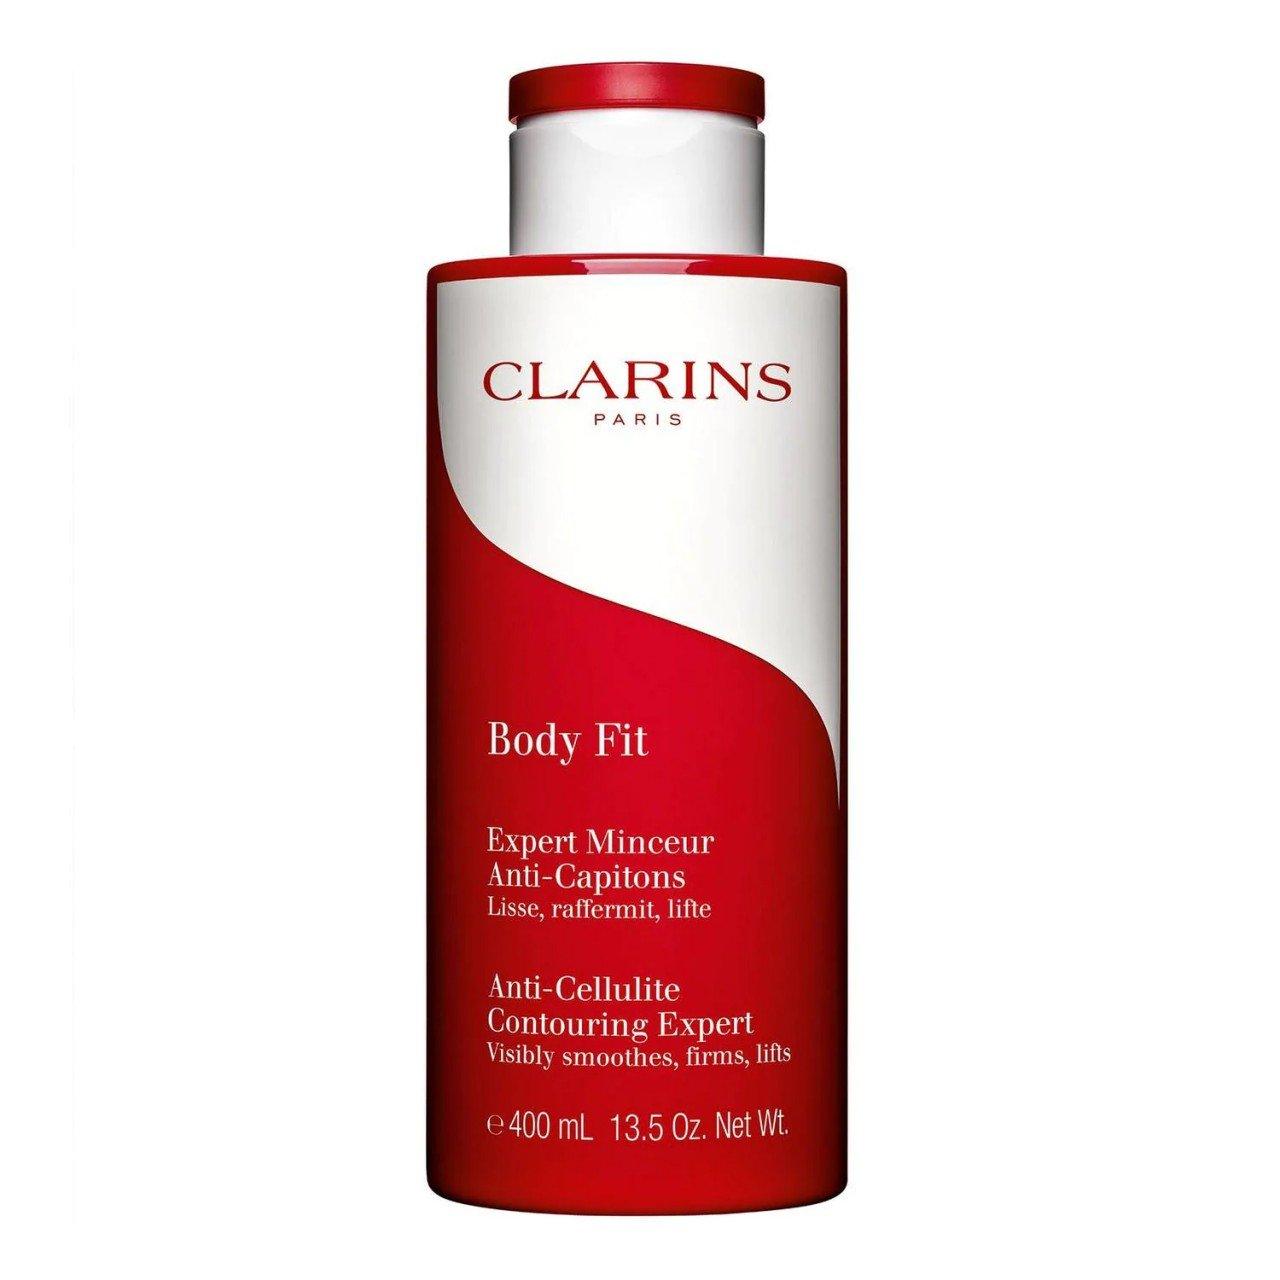 Clarins Body Fit Anti-Cellulite Contouring Expert - Perfume Oasis